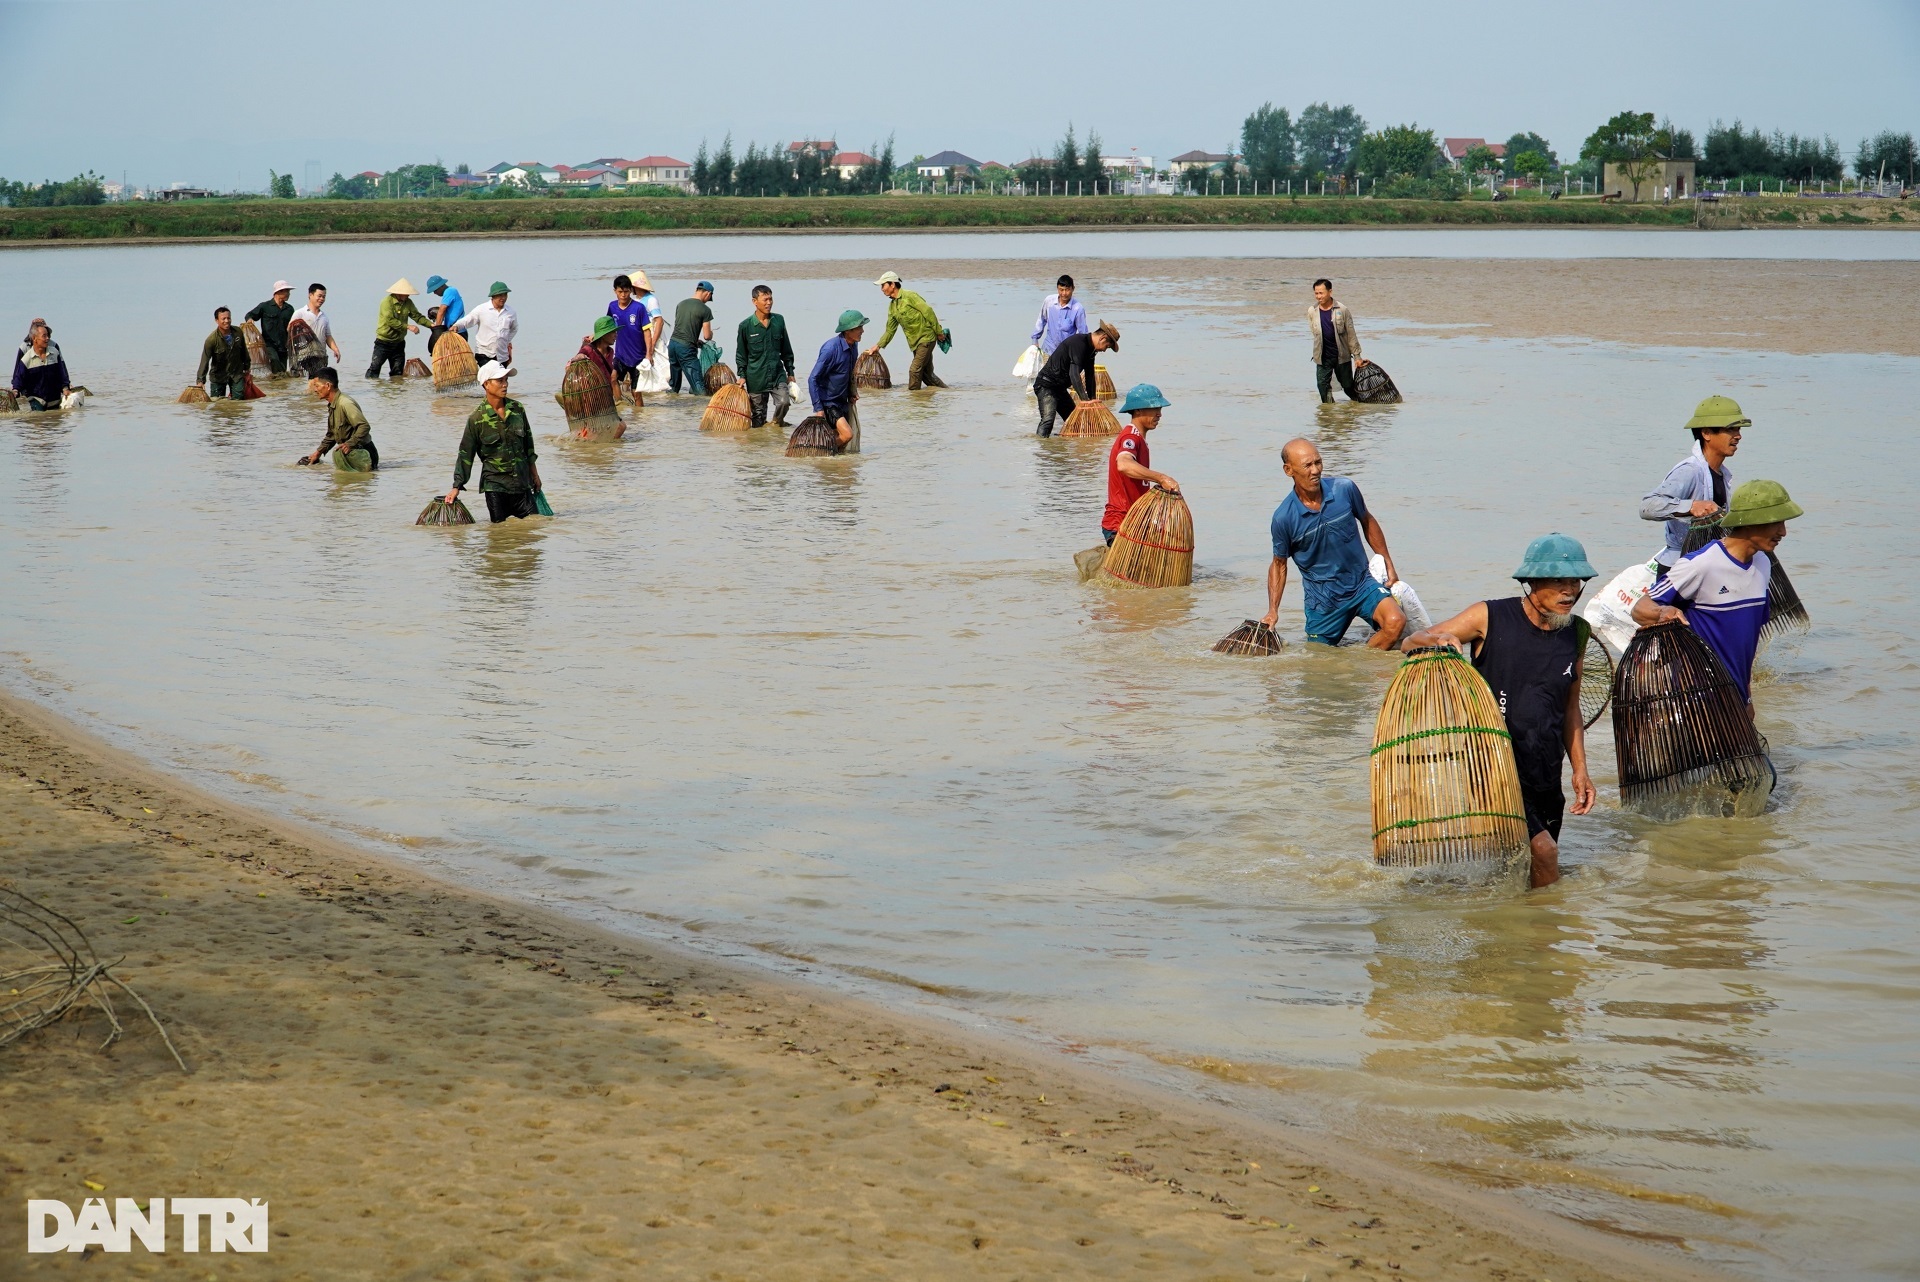 Street people flocked to buy tickets to compete in fish farming, and the lake owner collected nearly ten million dong - 7